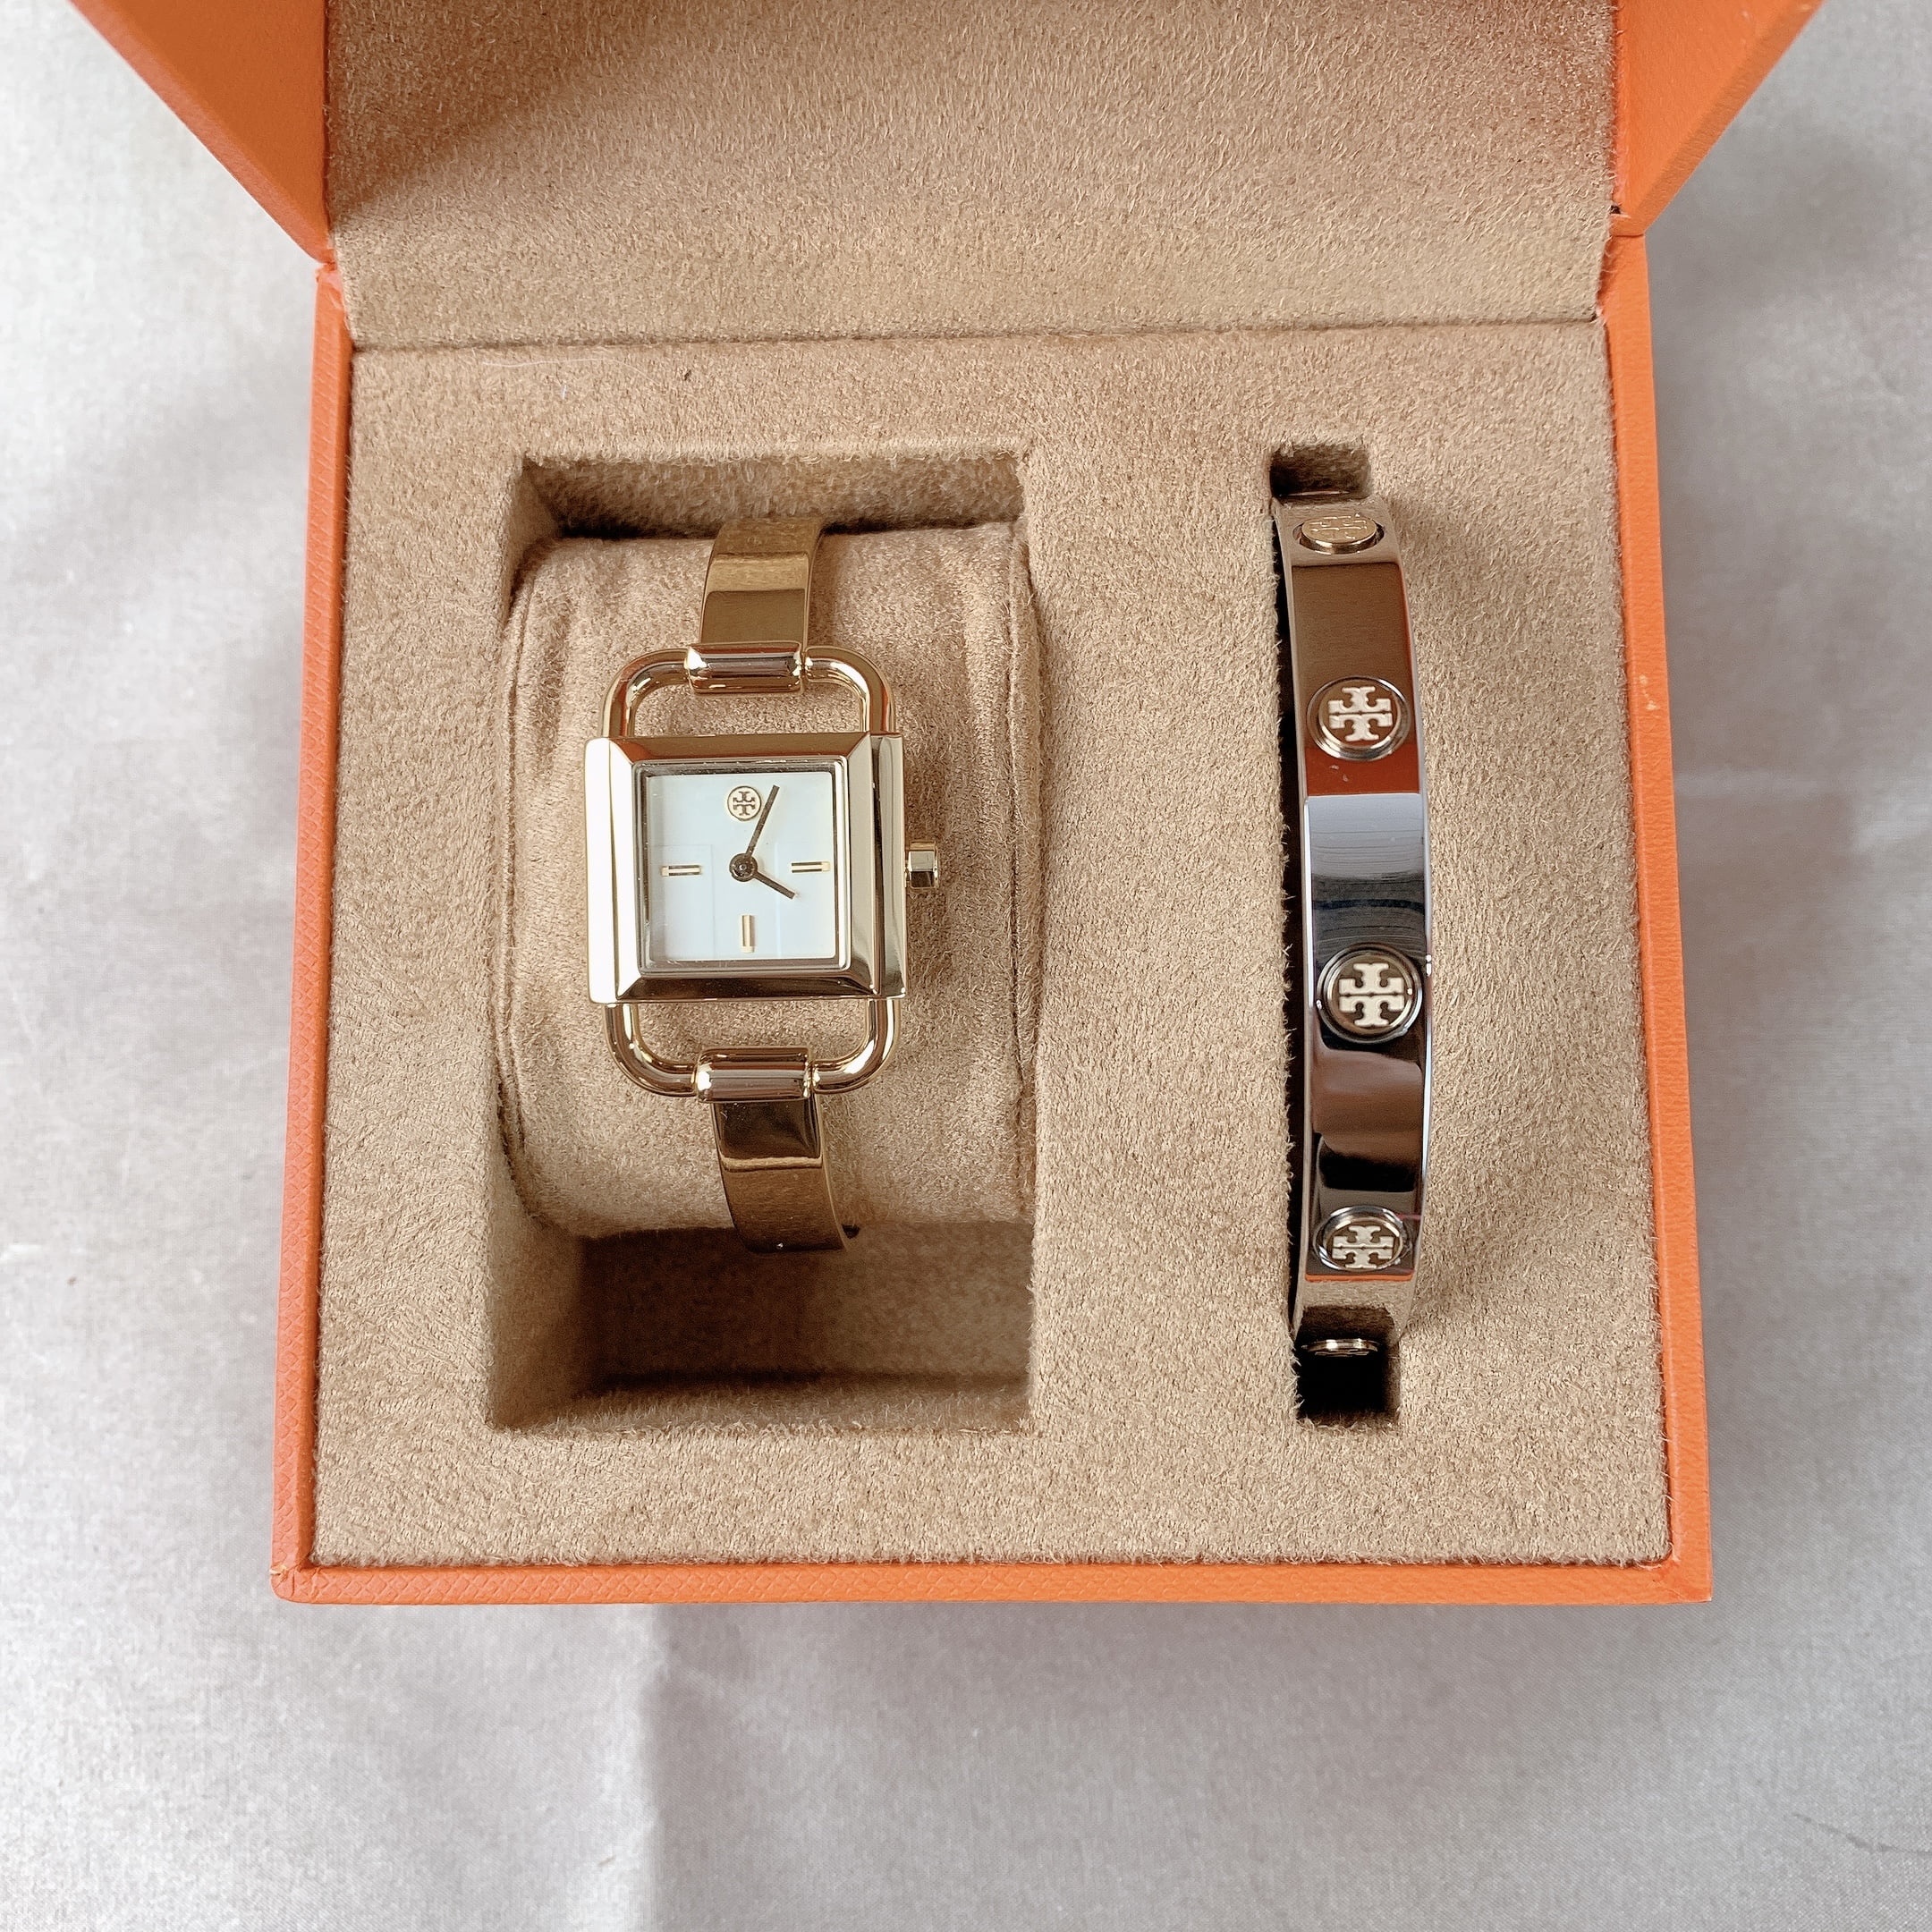 Tory Burch TBW7257 Phipps Watch Gift Set Two-Tone Stainless Steel -  